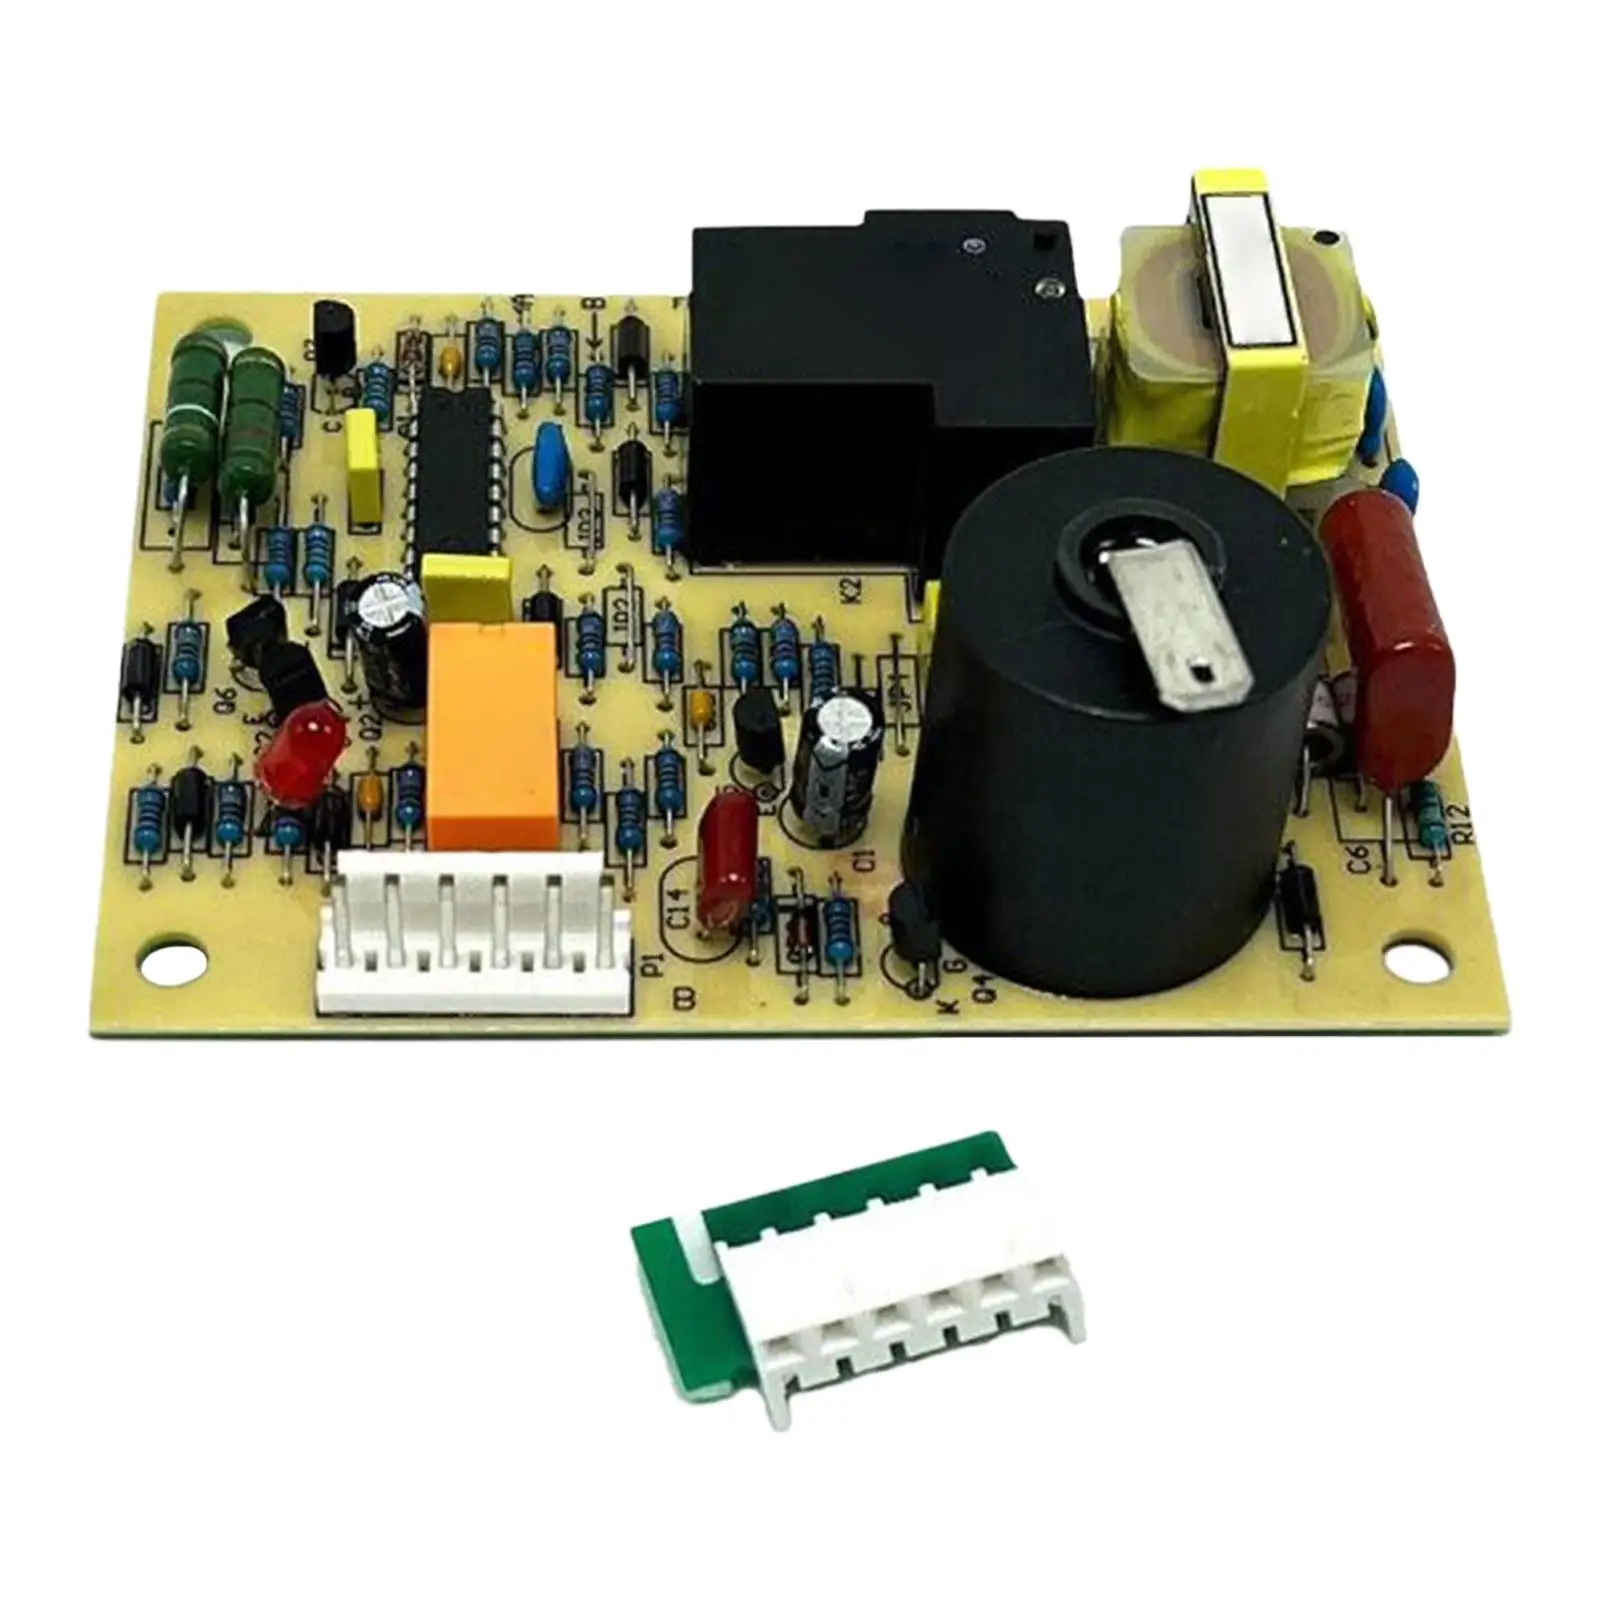 31501 Durable Spare Parts Circuit Board for 7912-ii Fa 79D Afsd20